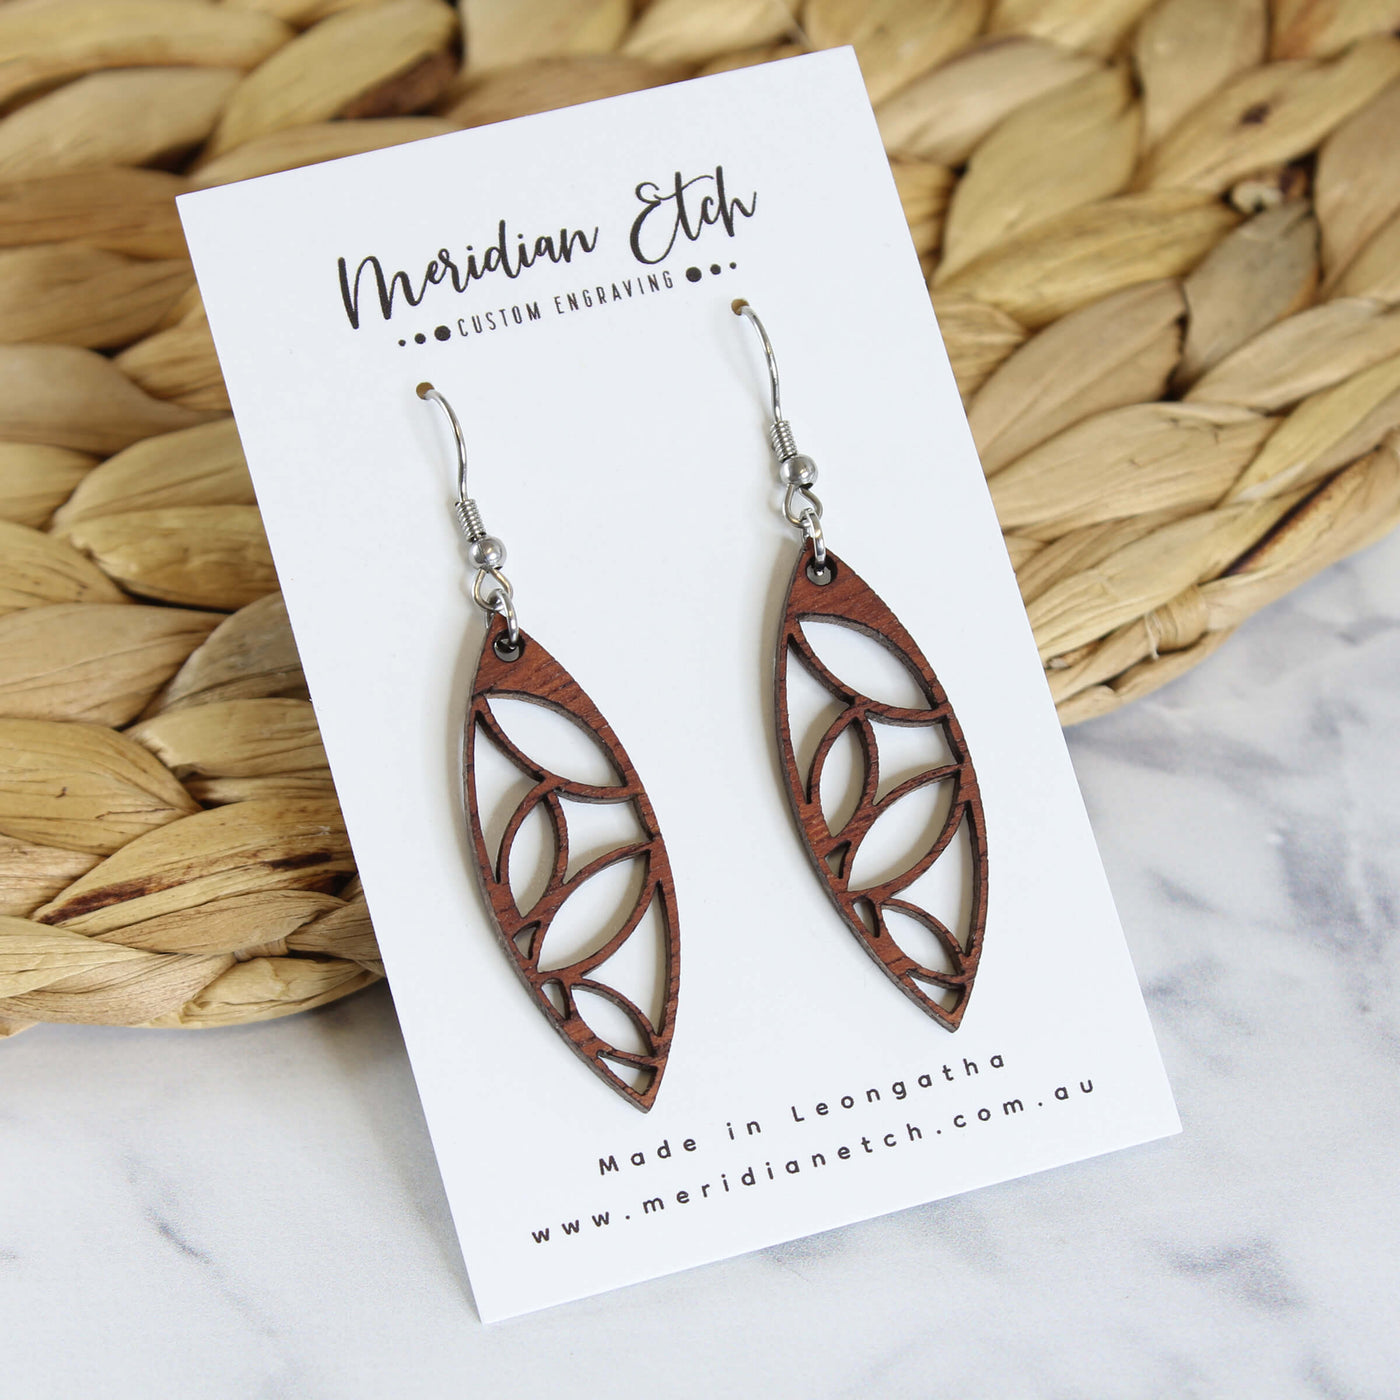 Wooden earrings with petals